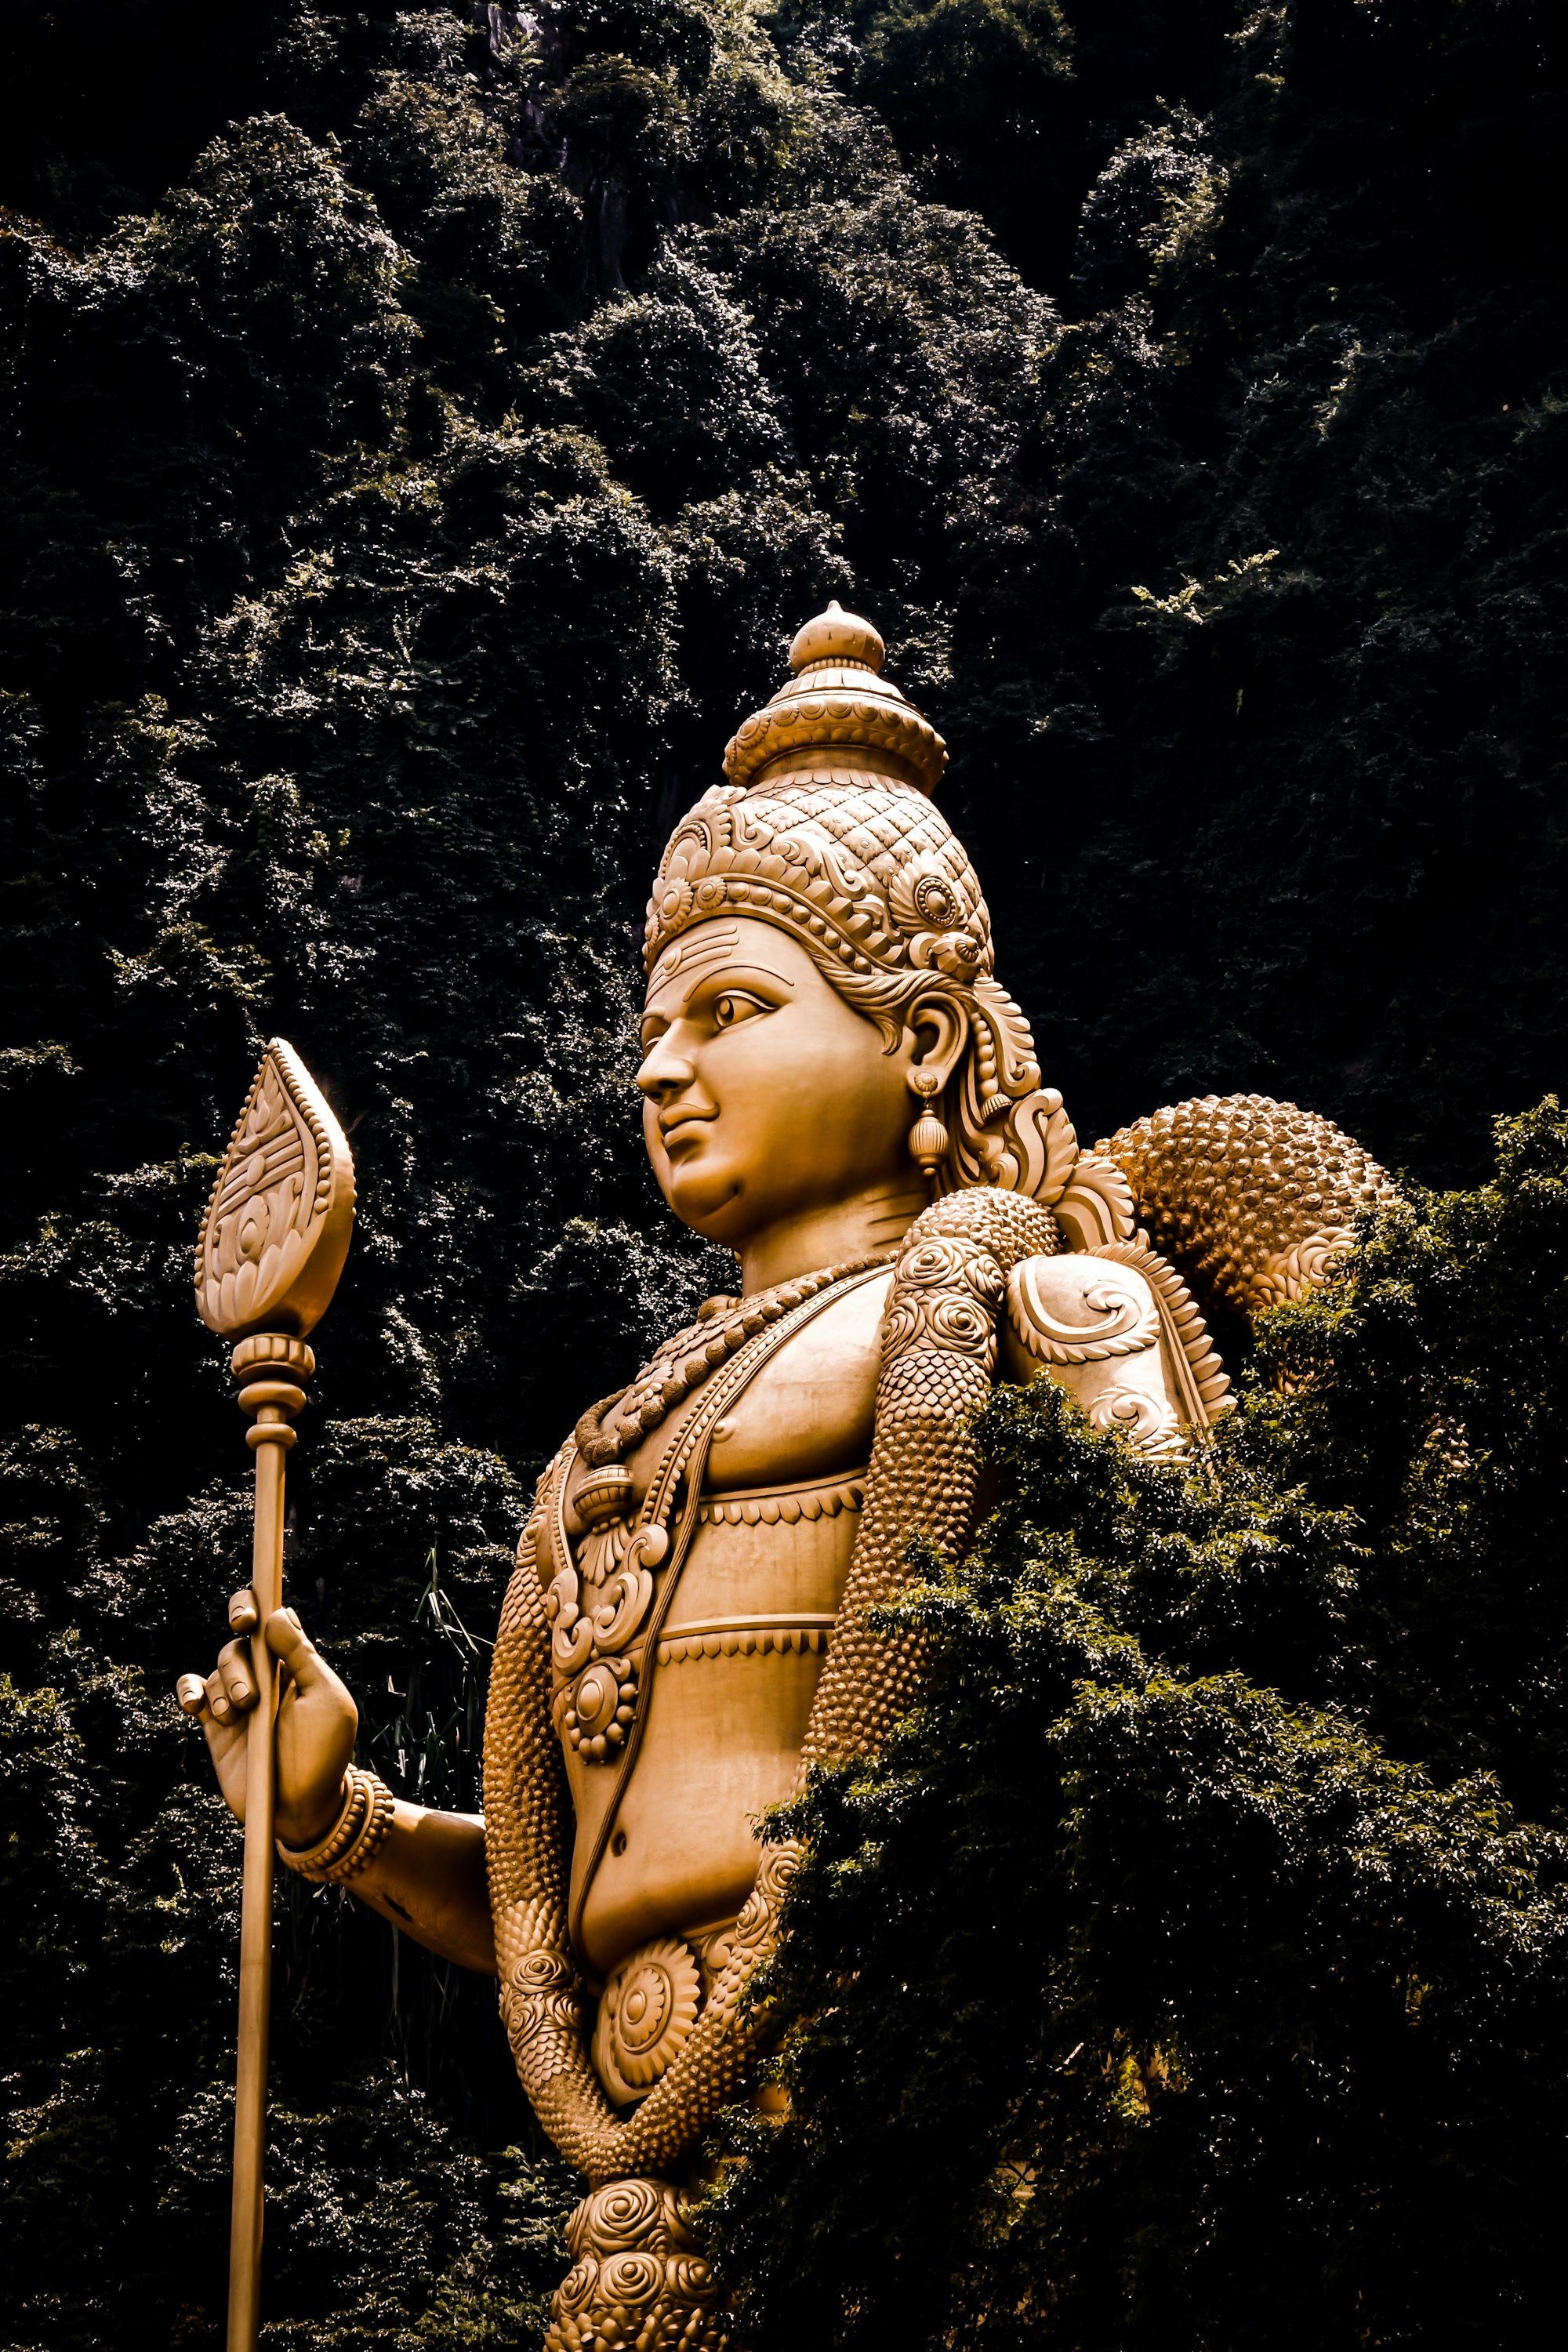 Why do Hindu deities such as Kartikeya have multiple arms? It represents their powers and ways of helping people. 